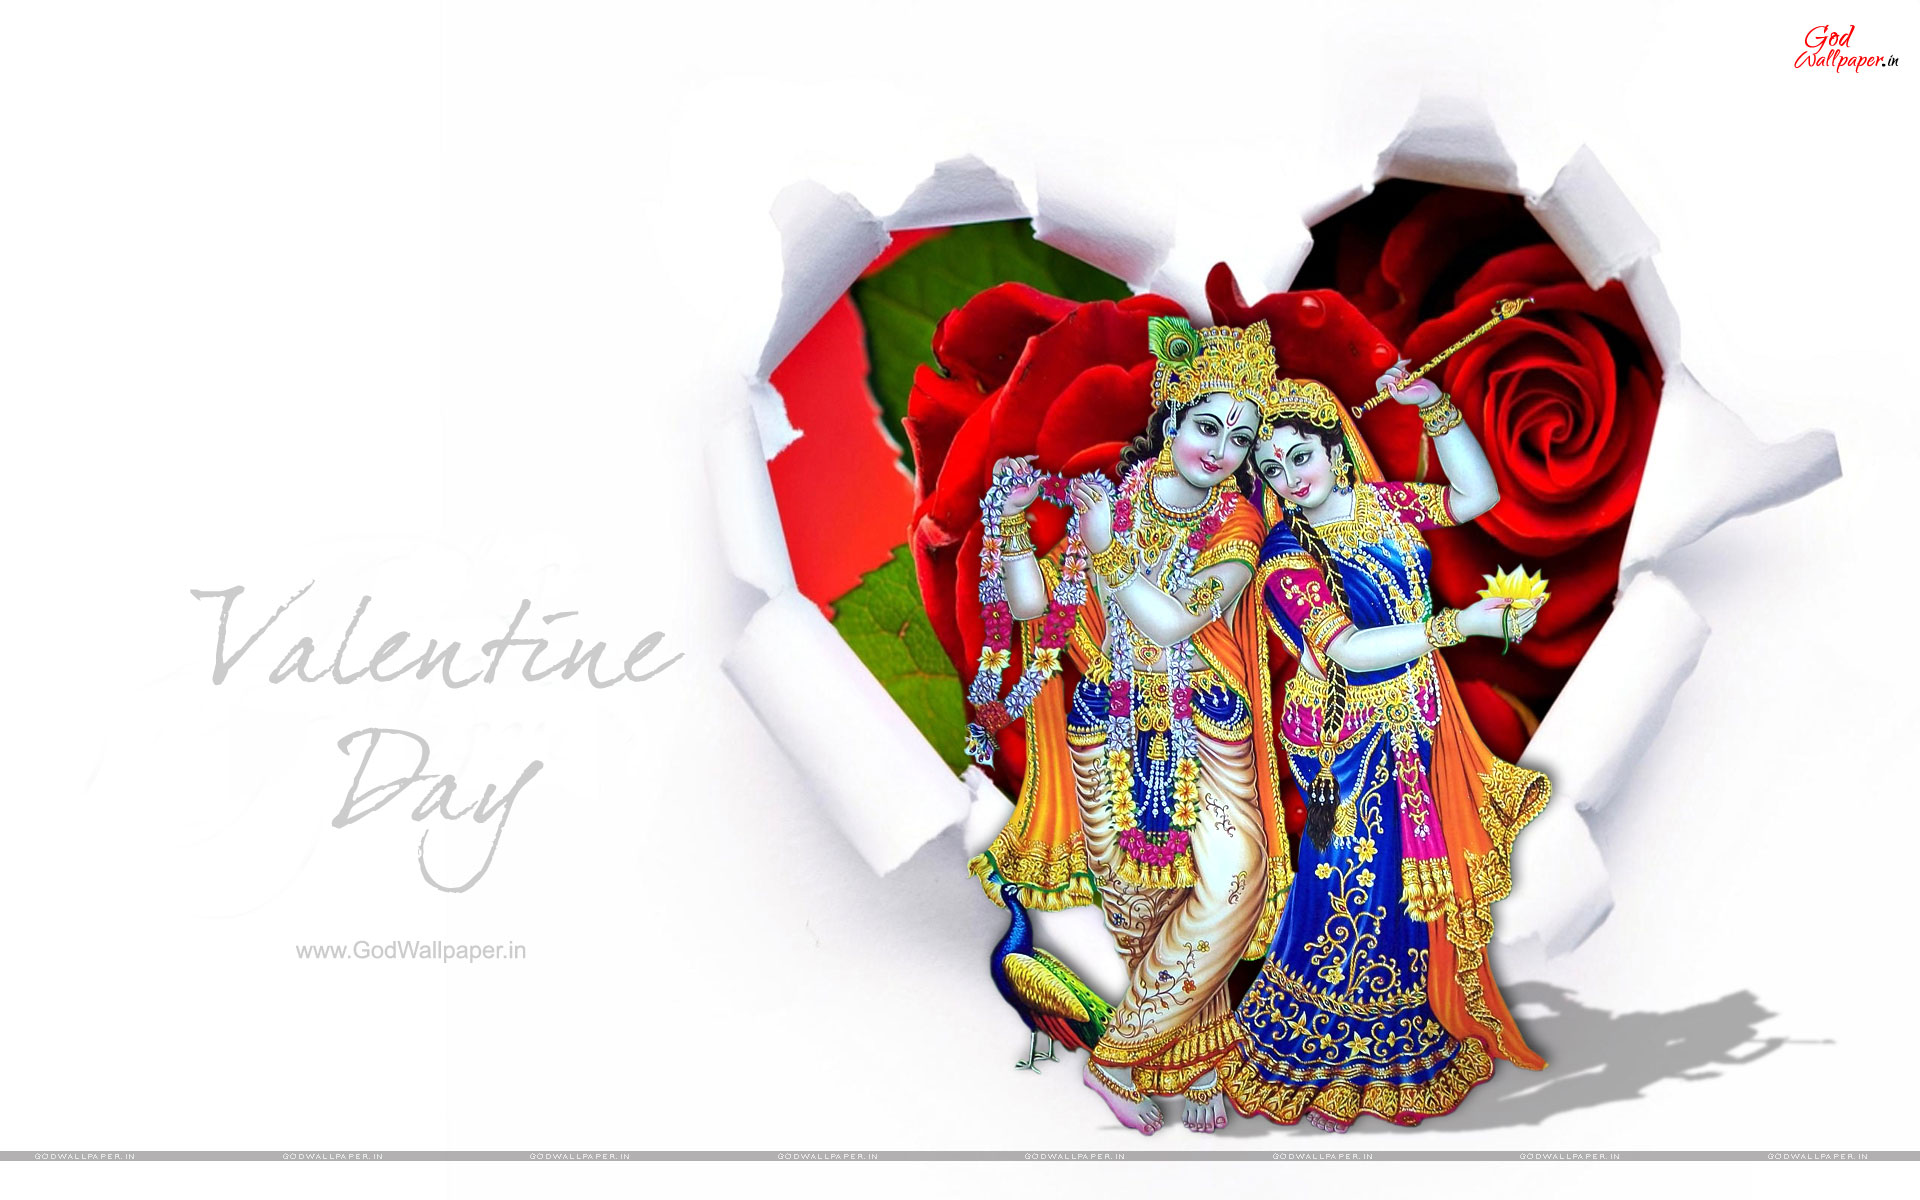 14 February Valentine's Day Wallpaper Free Download